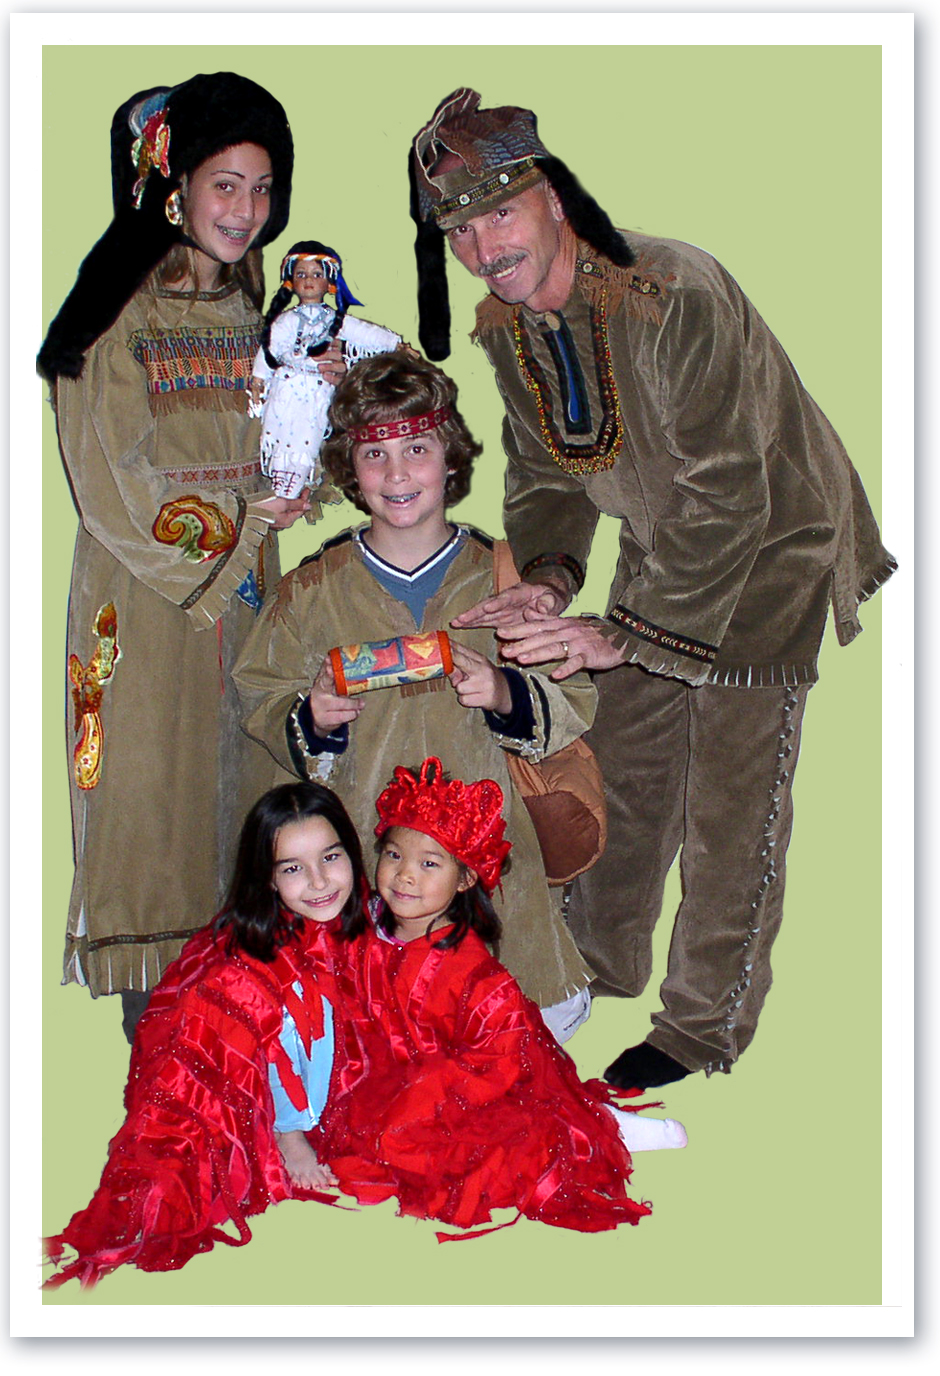 Literature Comes to Life image of Native American story characters